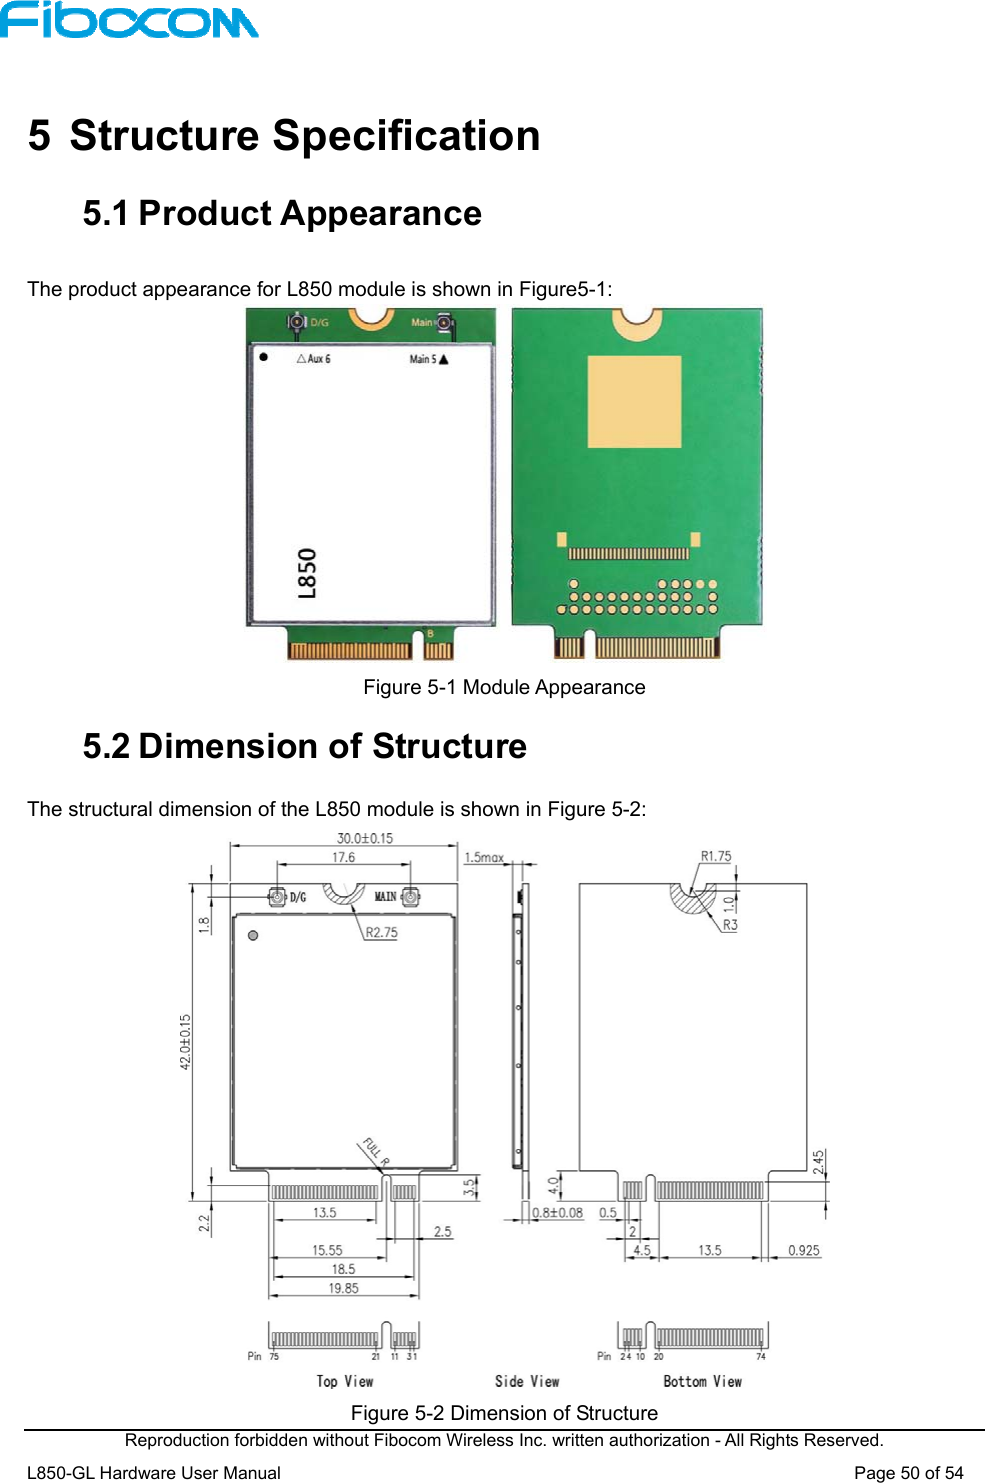  Reproduction forbidden without Fibocom Wireless Inc. written authorization - All Rights Reserved. L850-GL Hardware User Manual                                                                 Page 50 of 54  5  Structure Specification 5.1 Product Appearance The product appearance for L850 module is shown in Figure5-1:    Figure 5-1 Module Appearance 5.2 Dimension of Structure The structural dimension of the L850 module is shown in Figure 5-2:    Figure 5-2 Dimension of Structure 